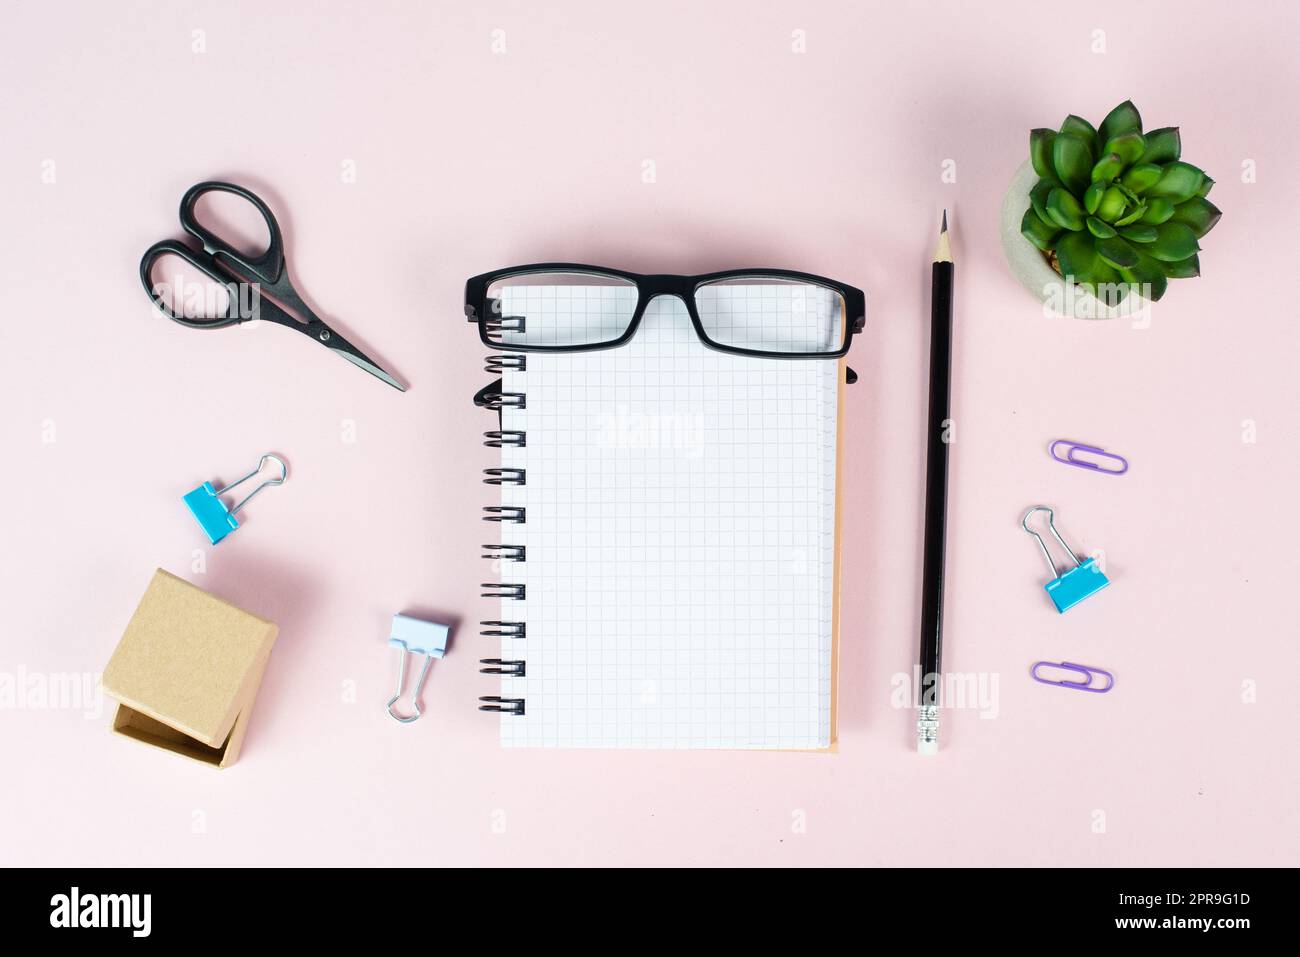 Empty notebook with a pen, eyeglasses and a cactus on a pastel colored desk, brainstorming for new ideas, writing a message, home office workplace Stock Photo